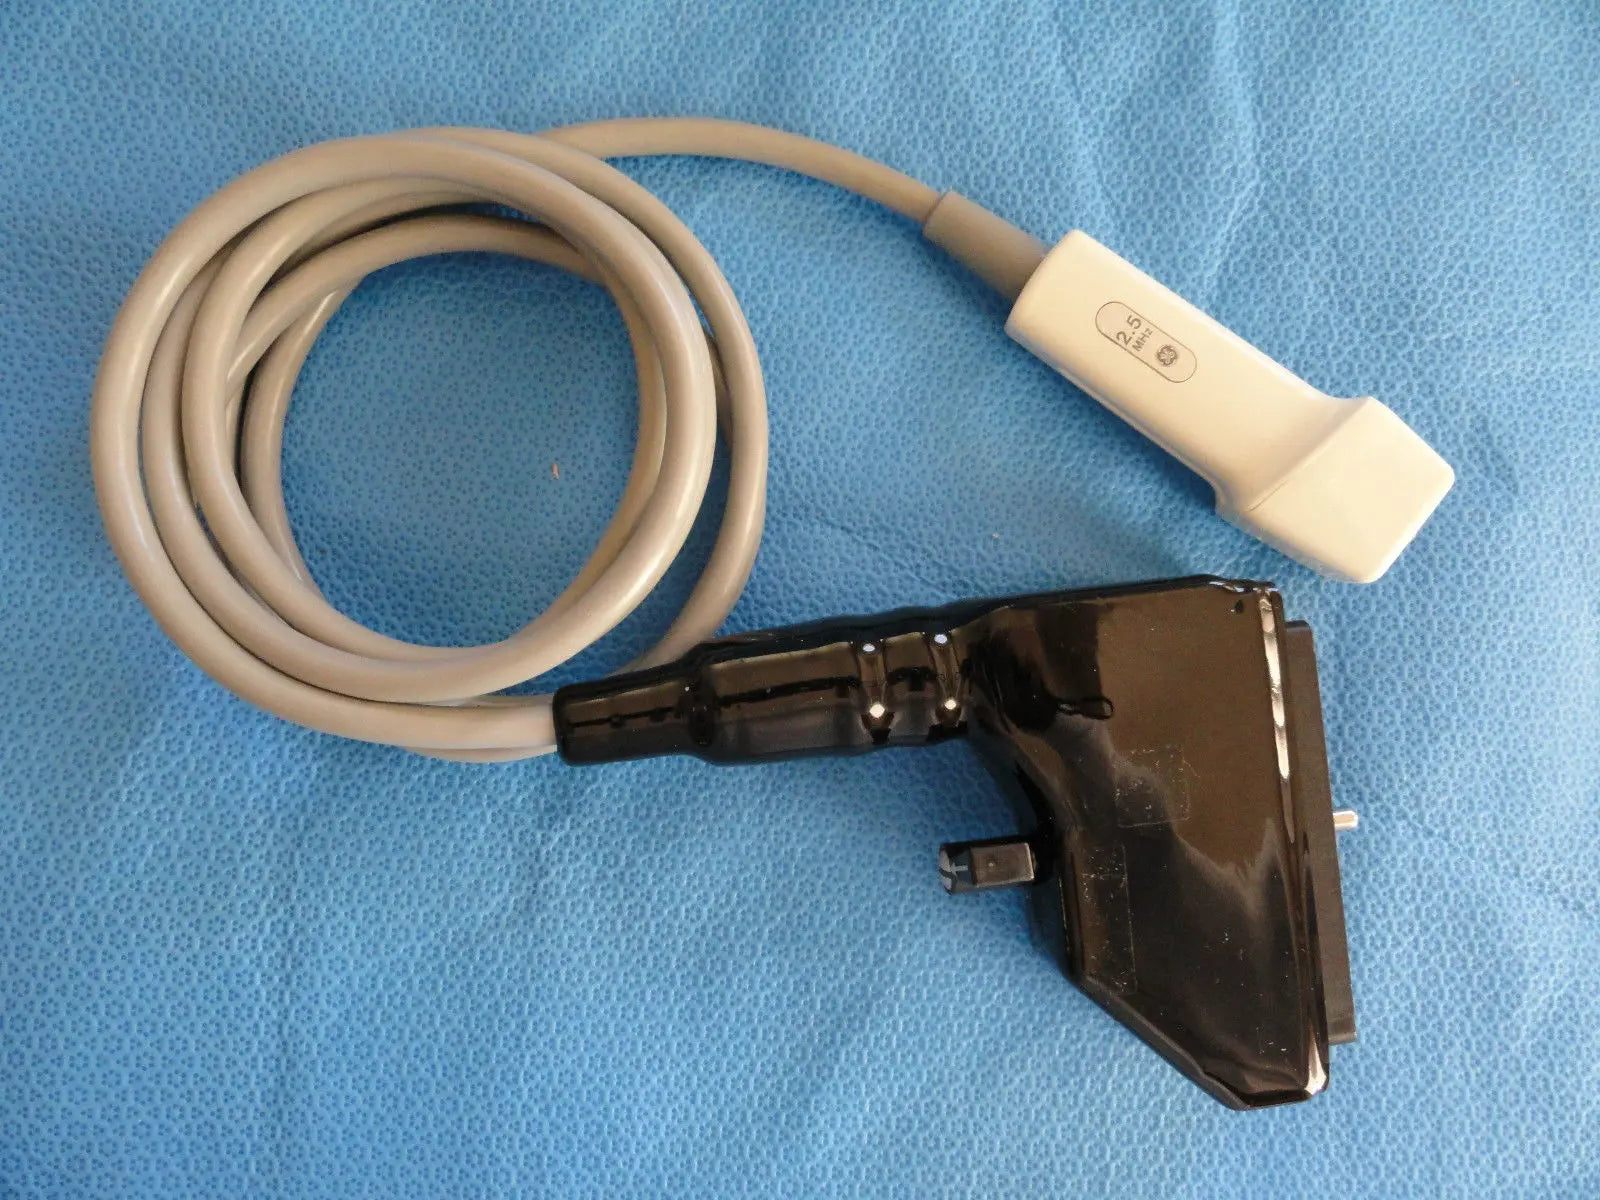 GE 2.5 MHz Cardiac Sector Ultrasound transducer probe for GE RT-6800 (3853)